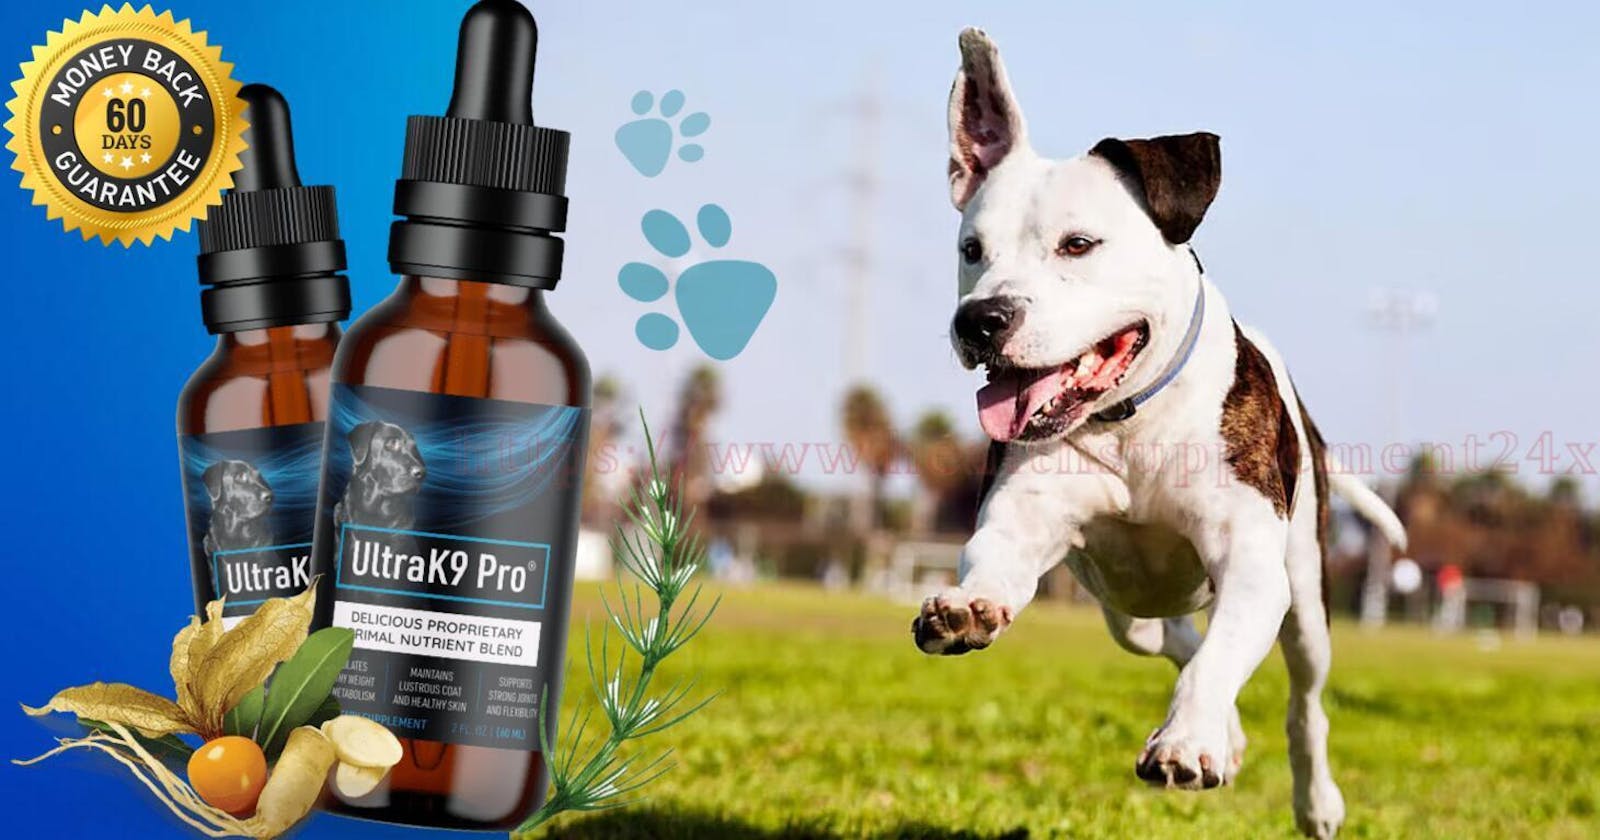 UltraK9 Pro Support A Healthy Happy Dog Enjoying Improved Digestion Advantages, Where To Buy(Spam Or Legit)